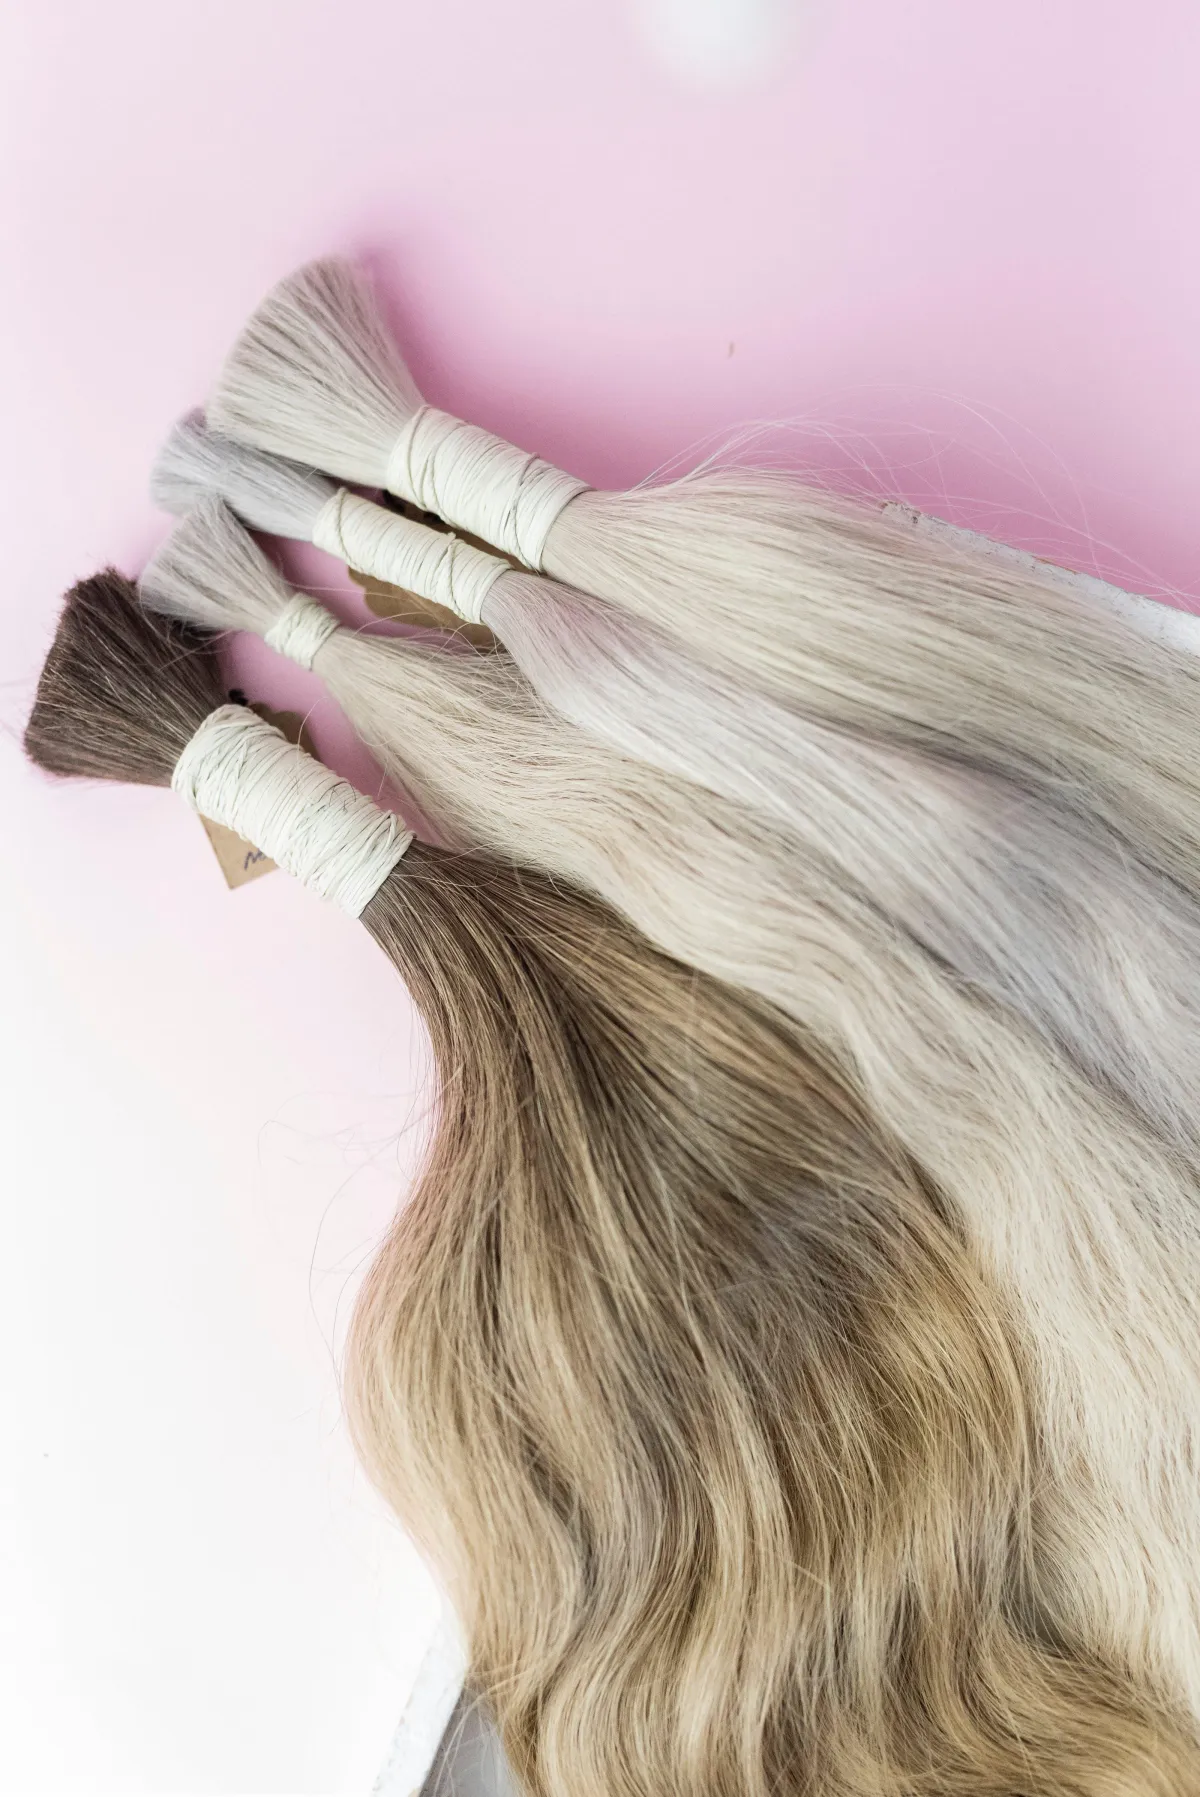 Hand-tied extensions will bring your long hair dreams to life without the hassle or waiting